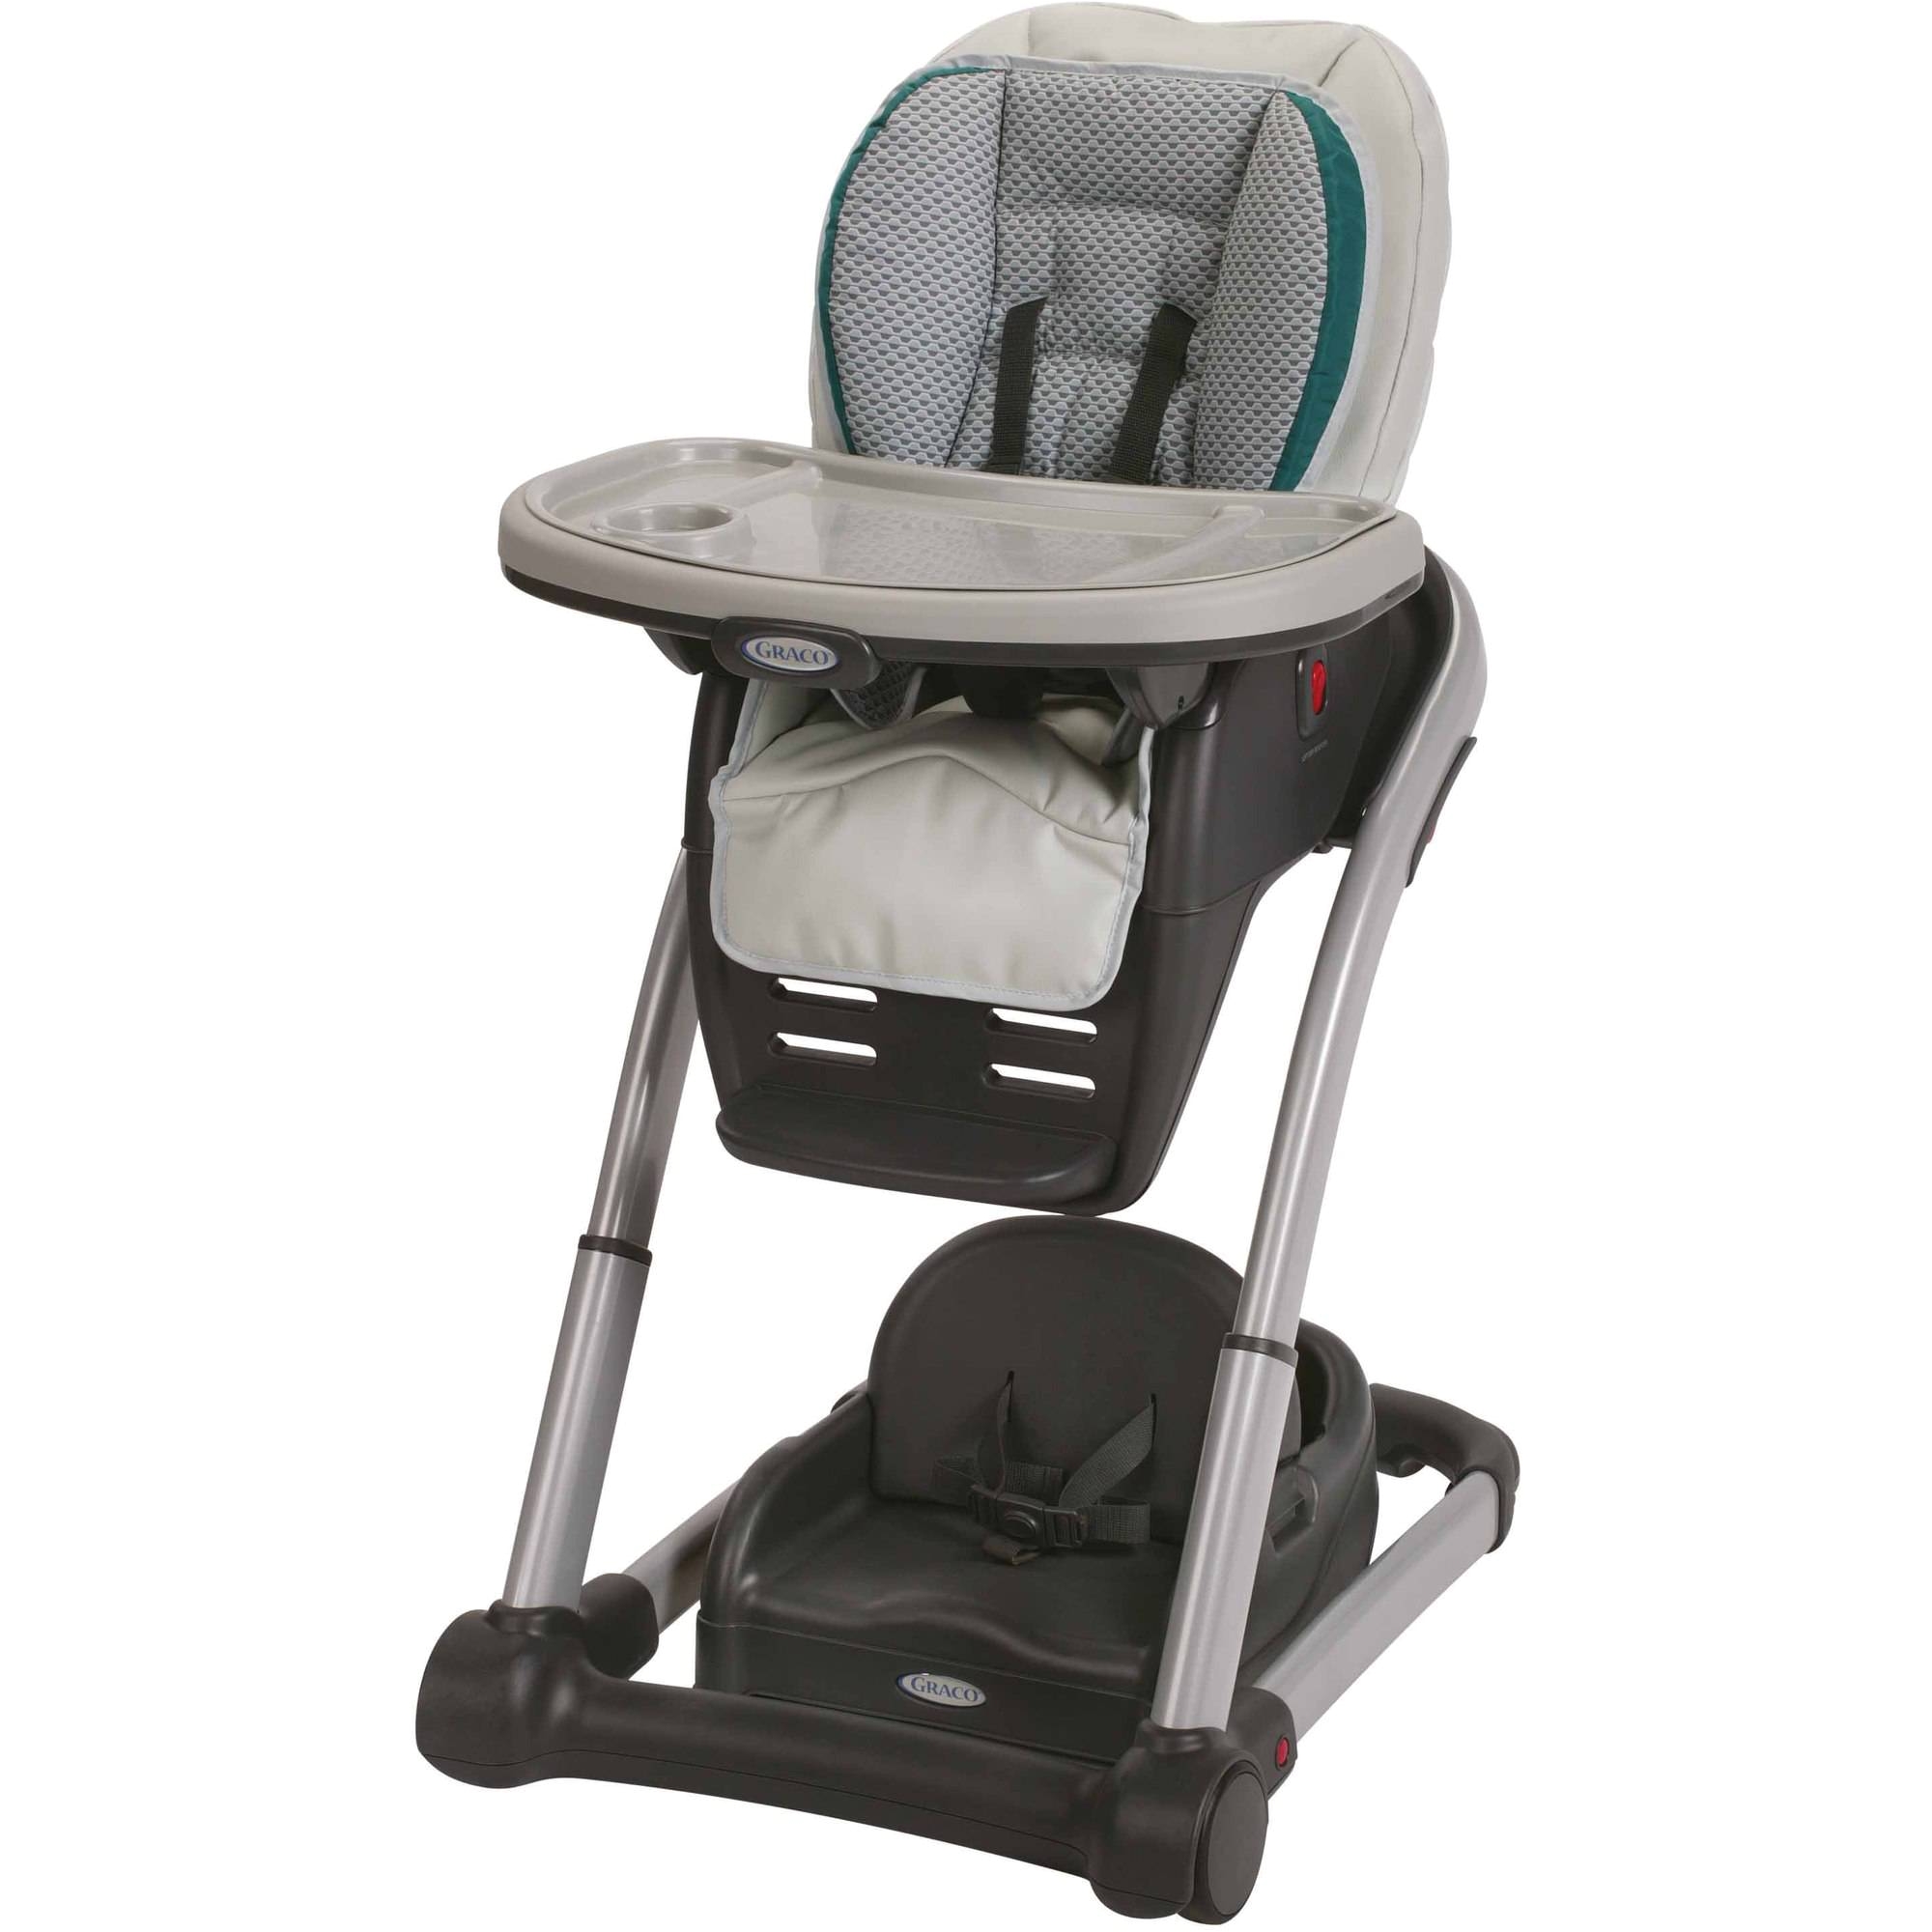 Graco High Chairs at Walmart Graco Simpleswitch 2 In 1 High Chair Zuba Walmart Com